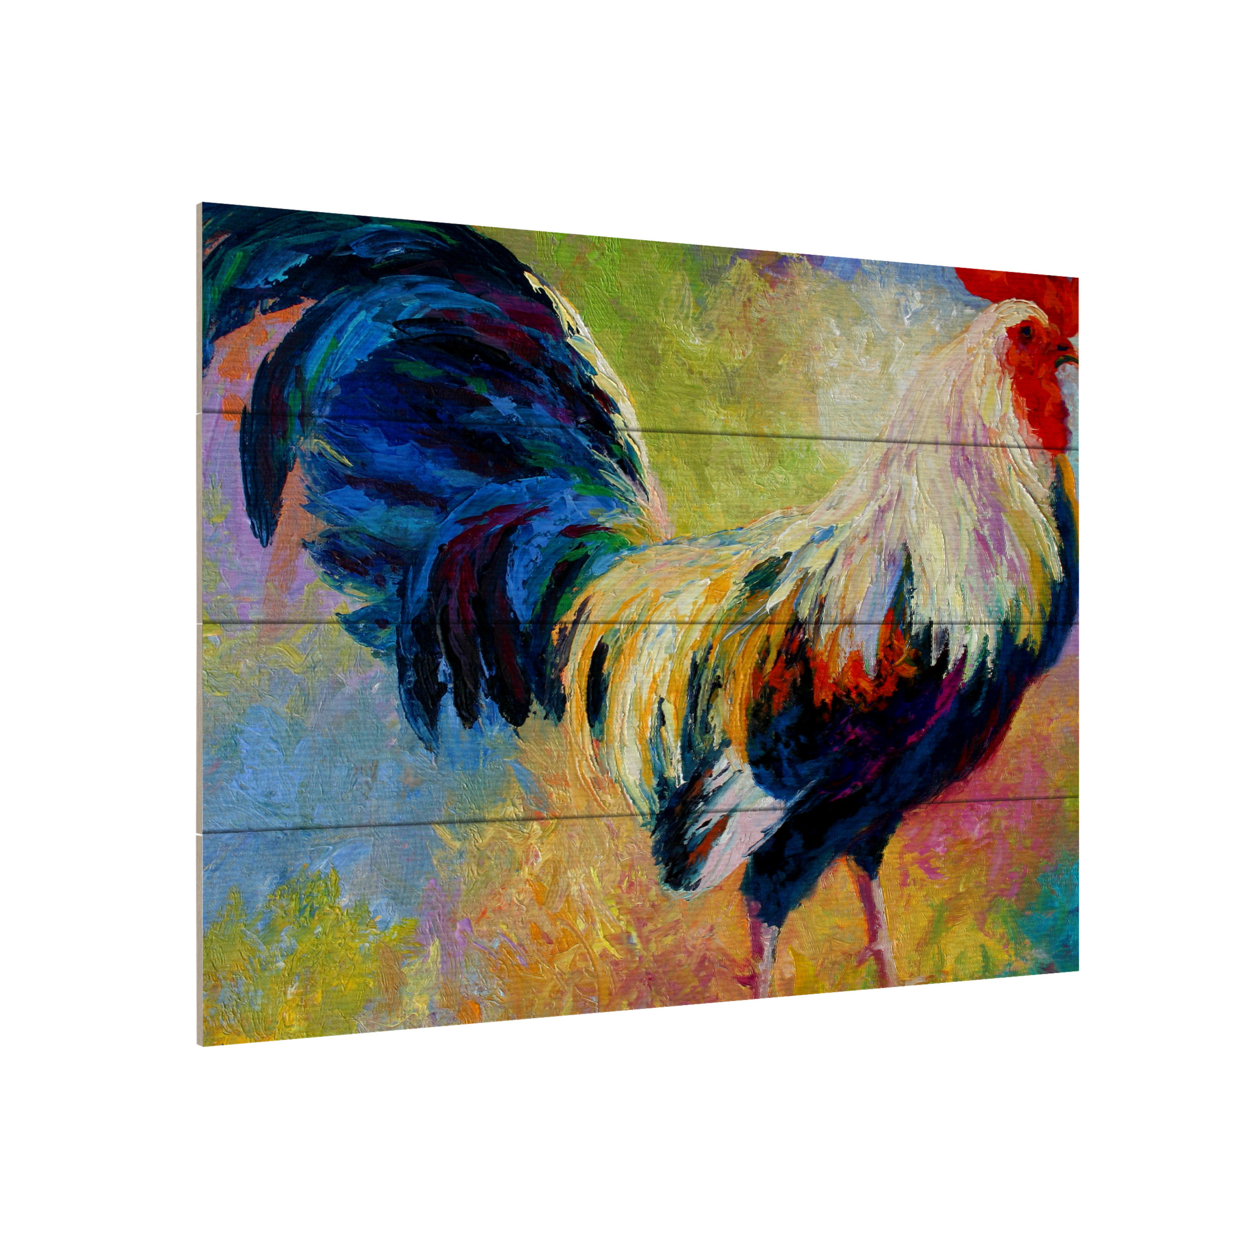 Wall Art 12 X 16 Inches Titled Eye Candy Ready To Hang Printed On Wooden Planks